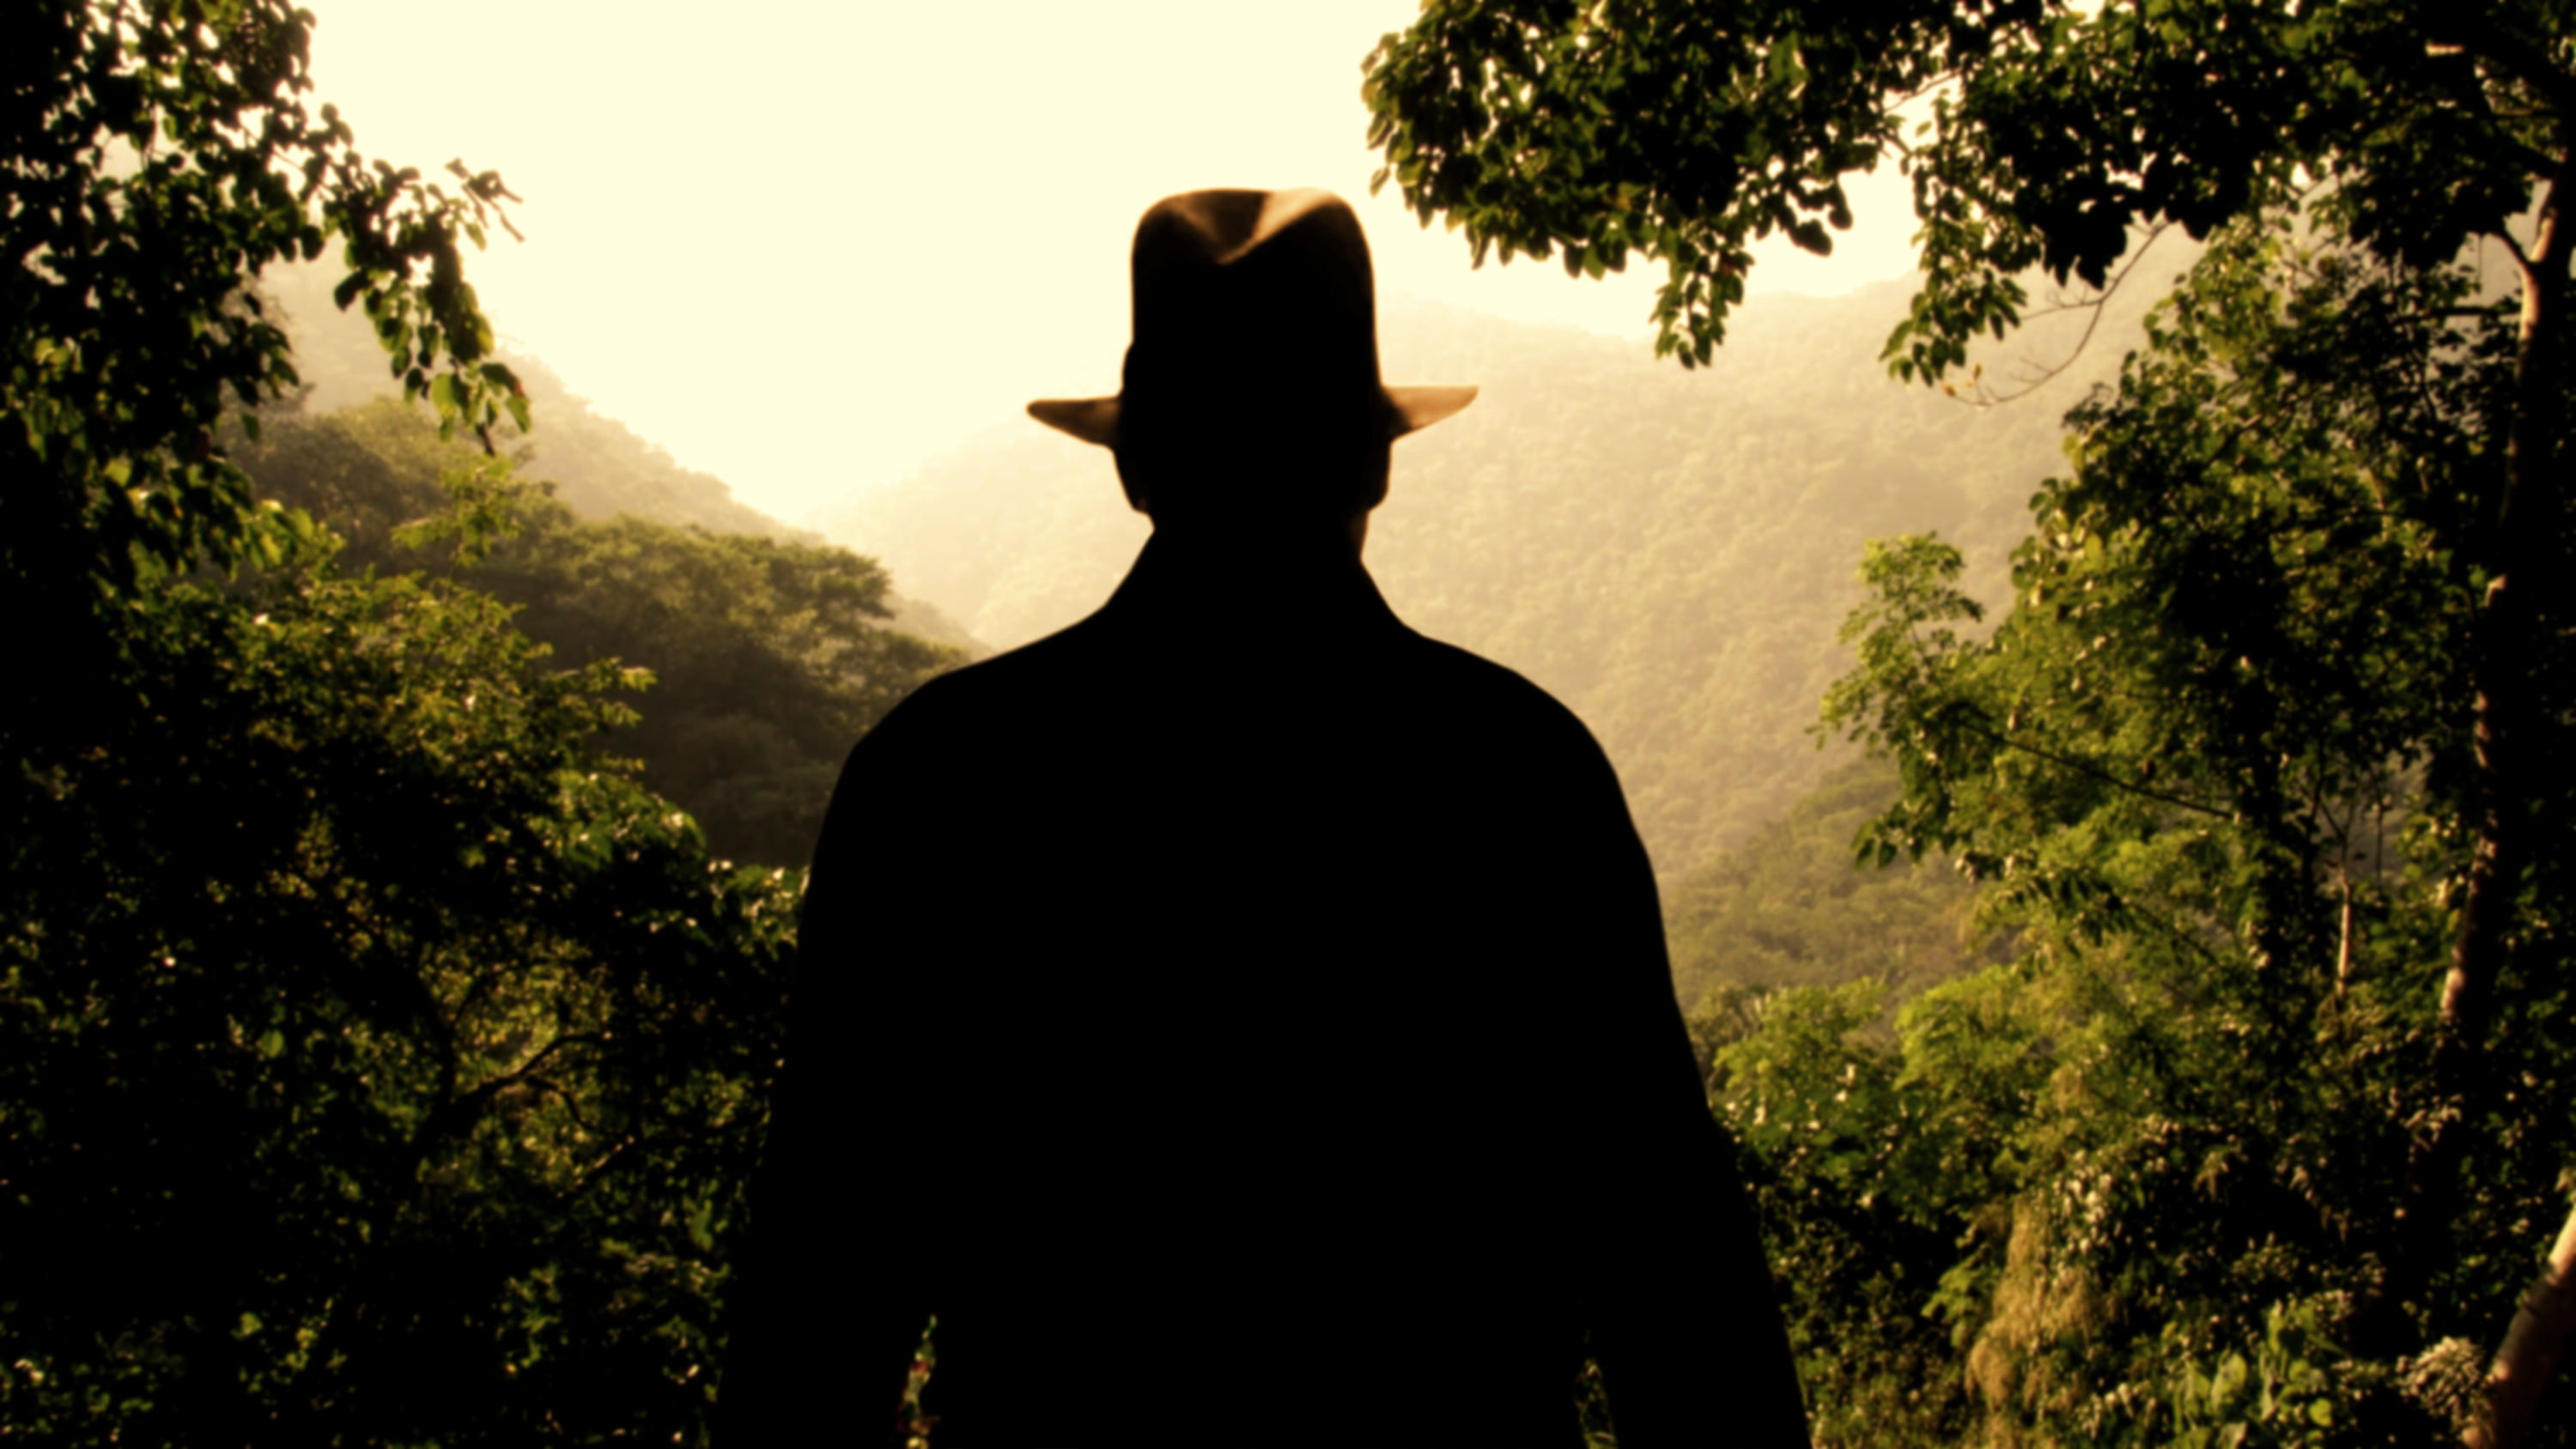 Indiana Jones 5: Where In The World Could He Go?